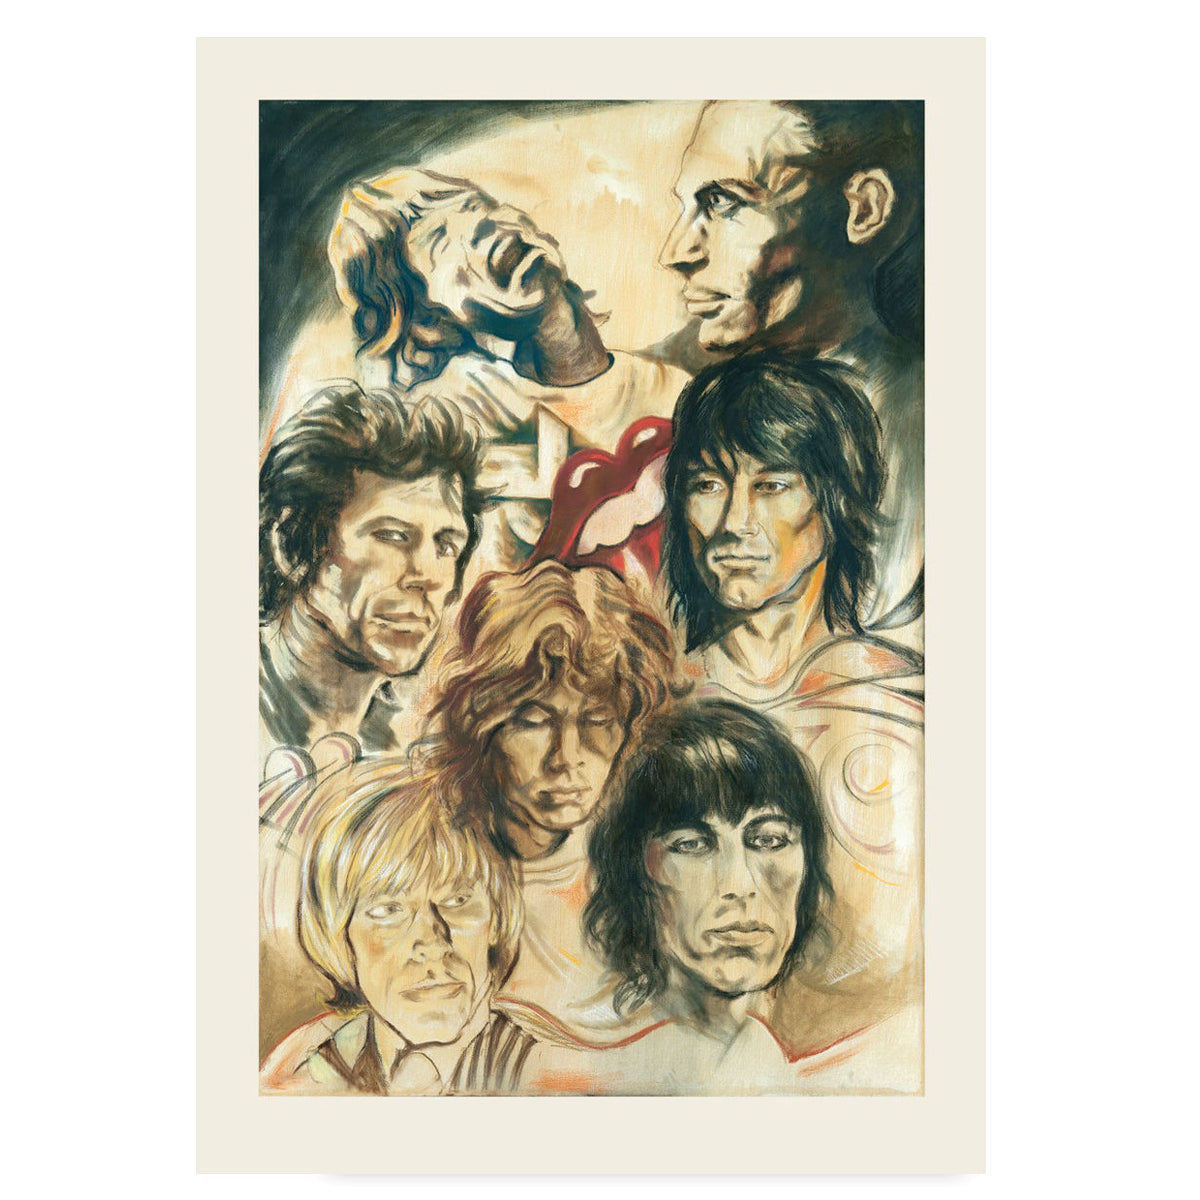 Ronnie Wood - Stones Through The Ages (Large Size)